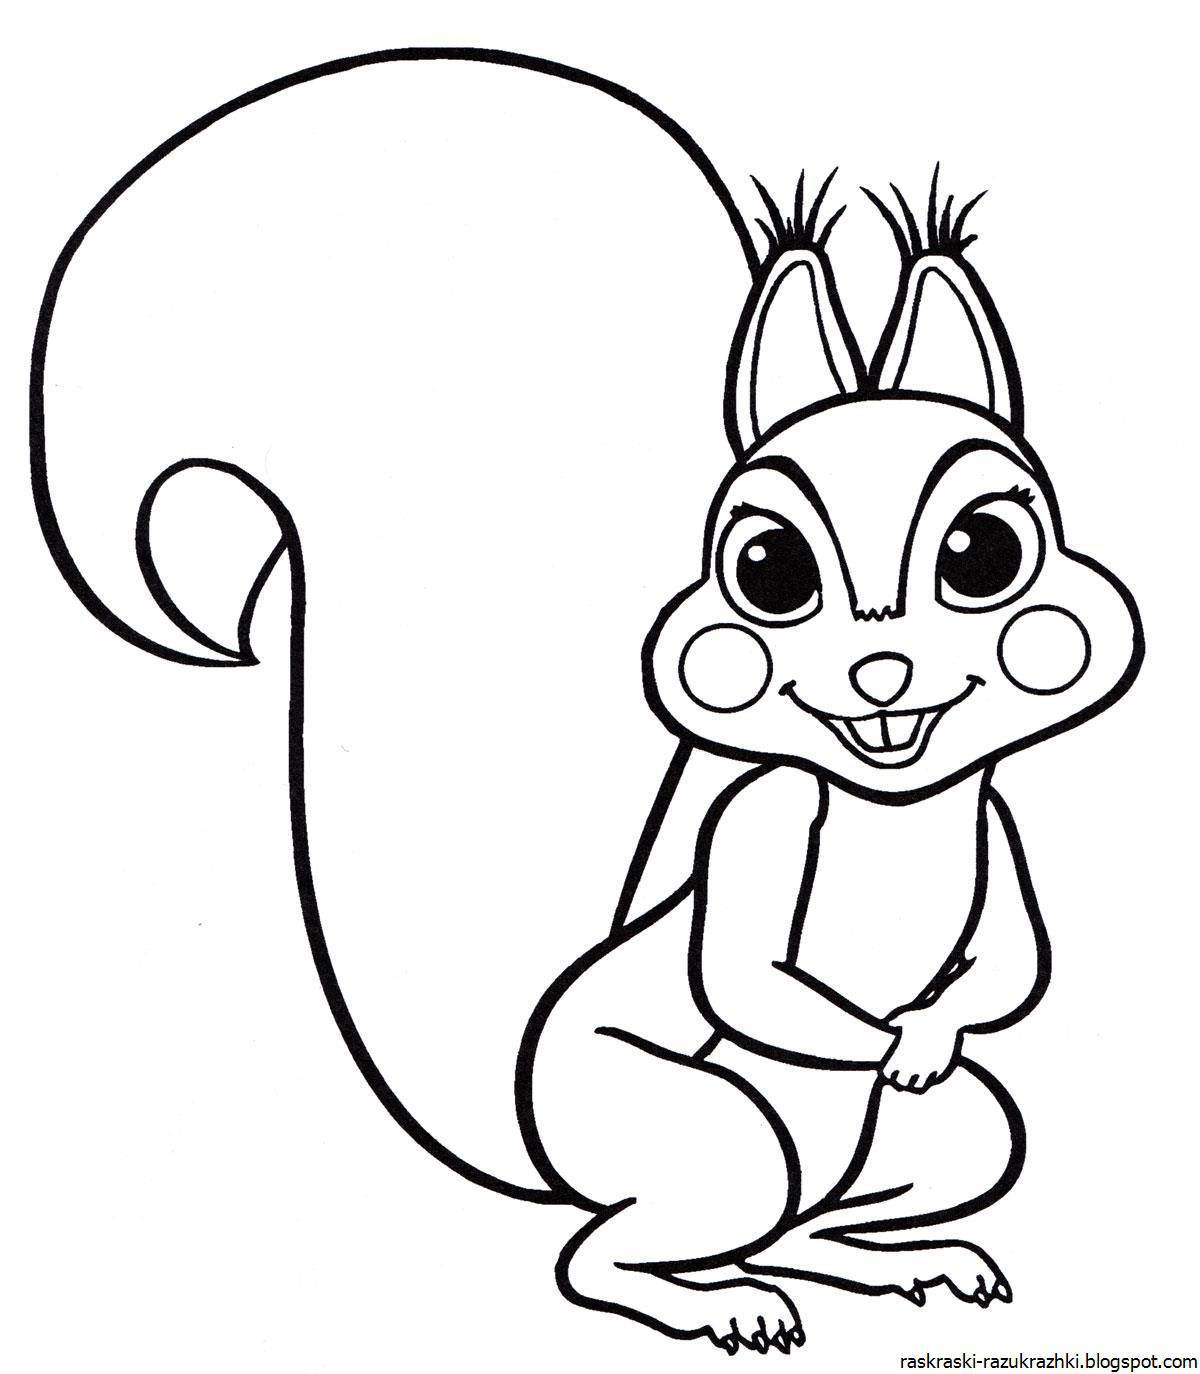 Squirrel for kids #2